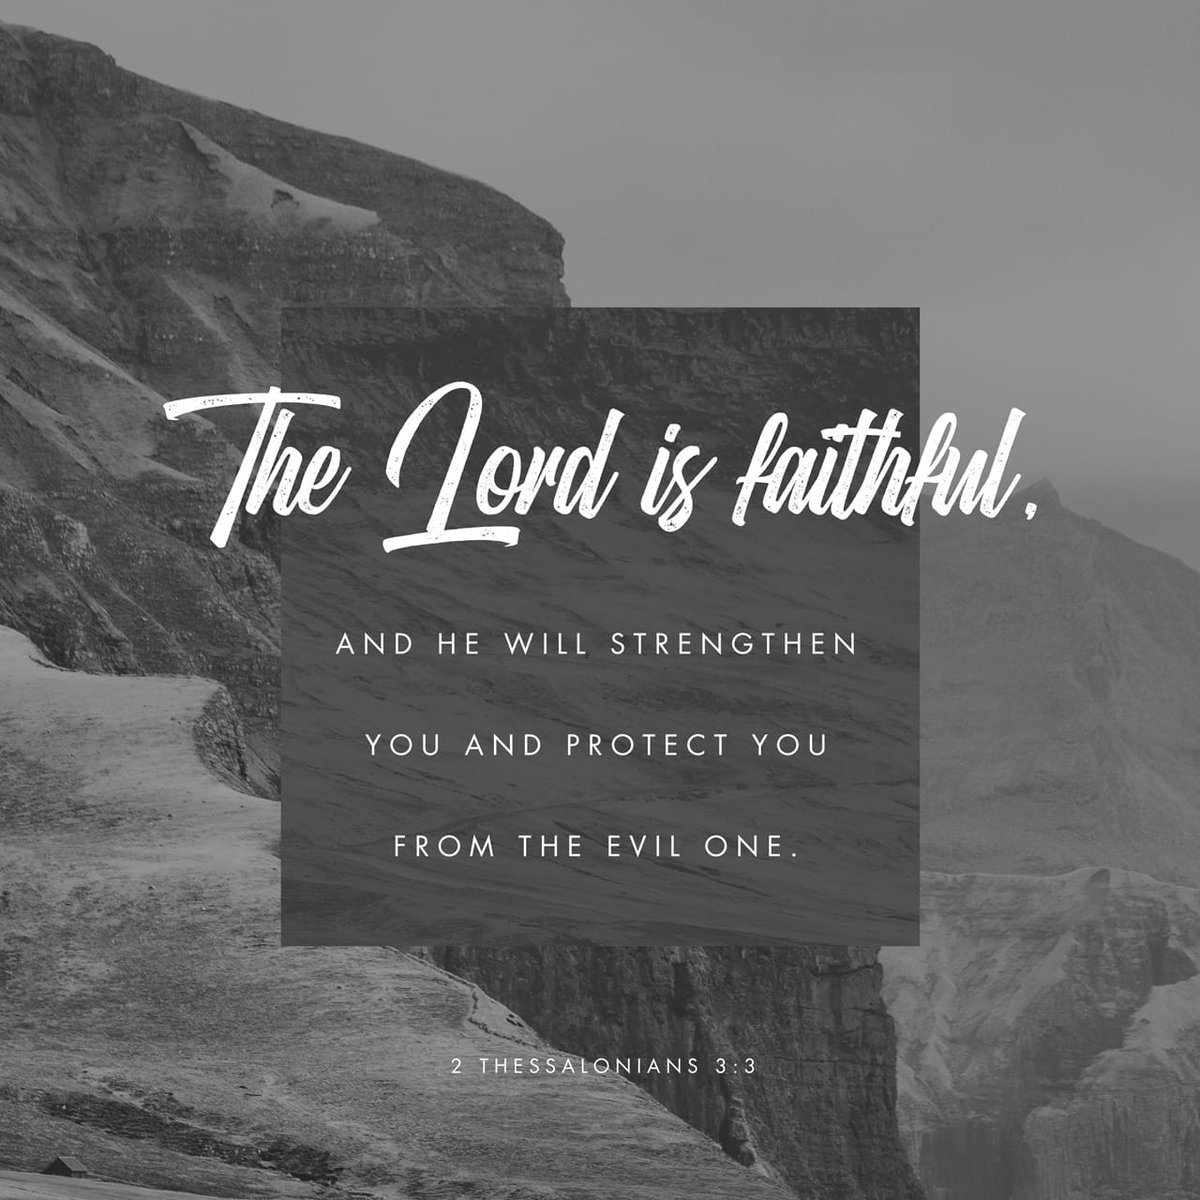 2 Thessalonians 3:3 NASB But the Lord is faithful, and He will strengthen and protect you from the evil one. #dailybread #dailyverse #scripture #bibleverse #bible #jesus